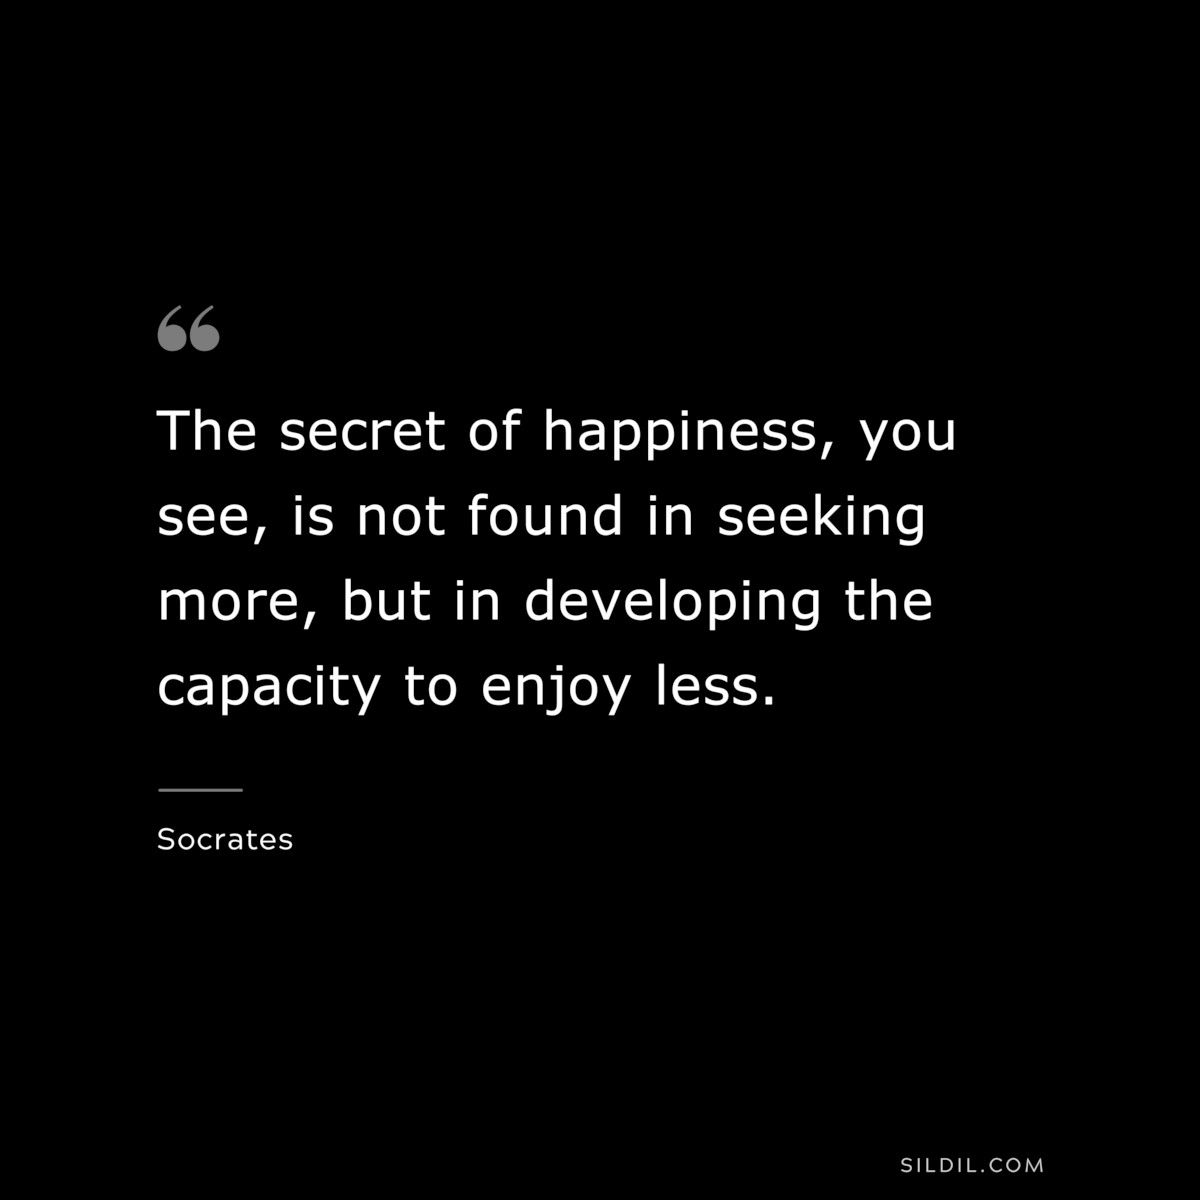 The secret of happiness, you see, is not found in seeking more, but in developing the capacity to enjoy less. ― Socrates